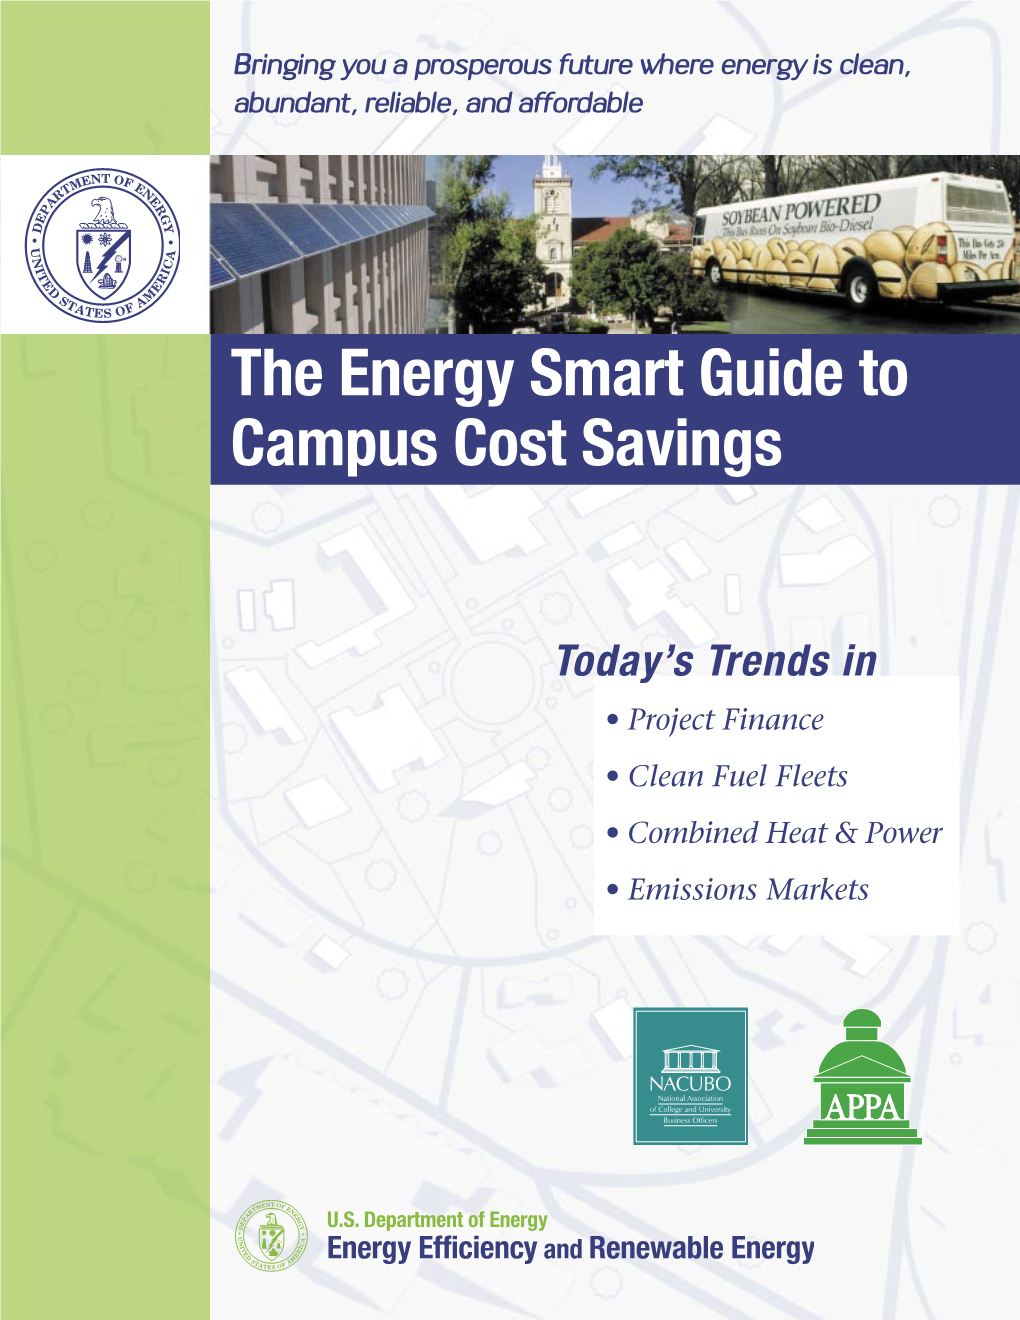 The Energy Smart Guide to Campus Cost Savings